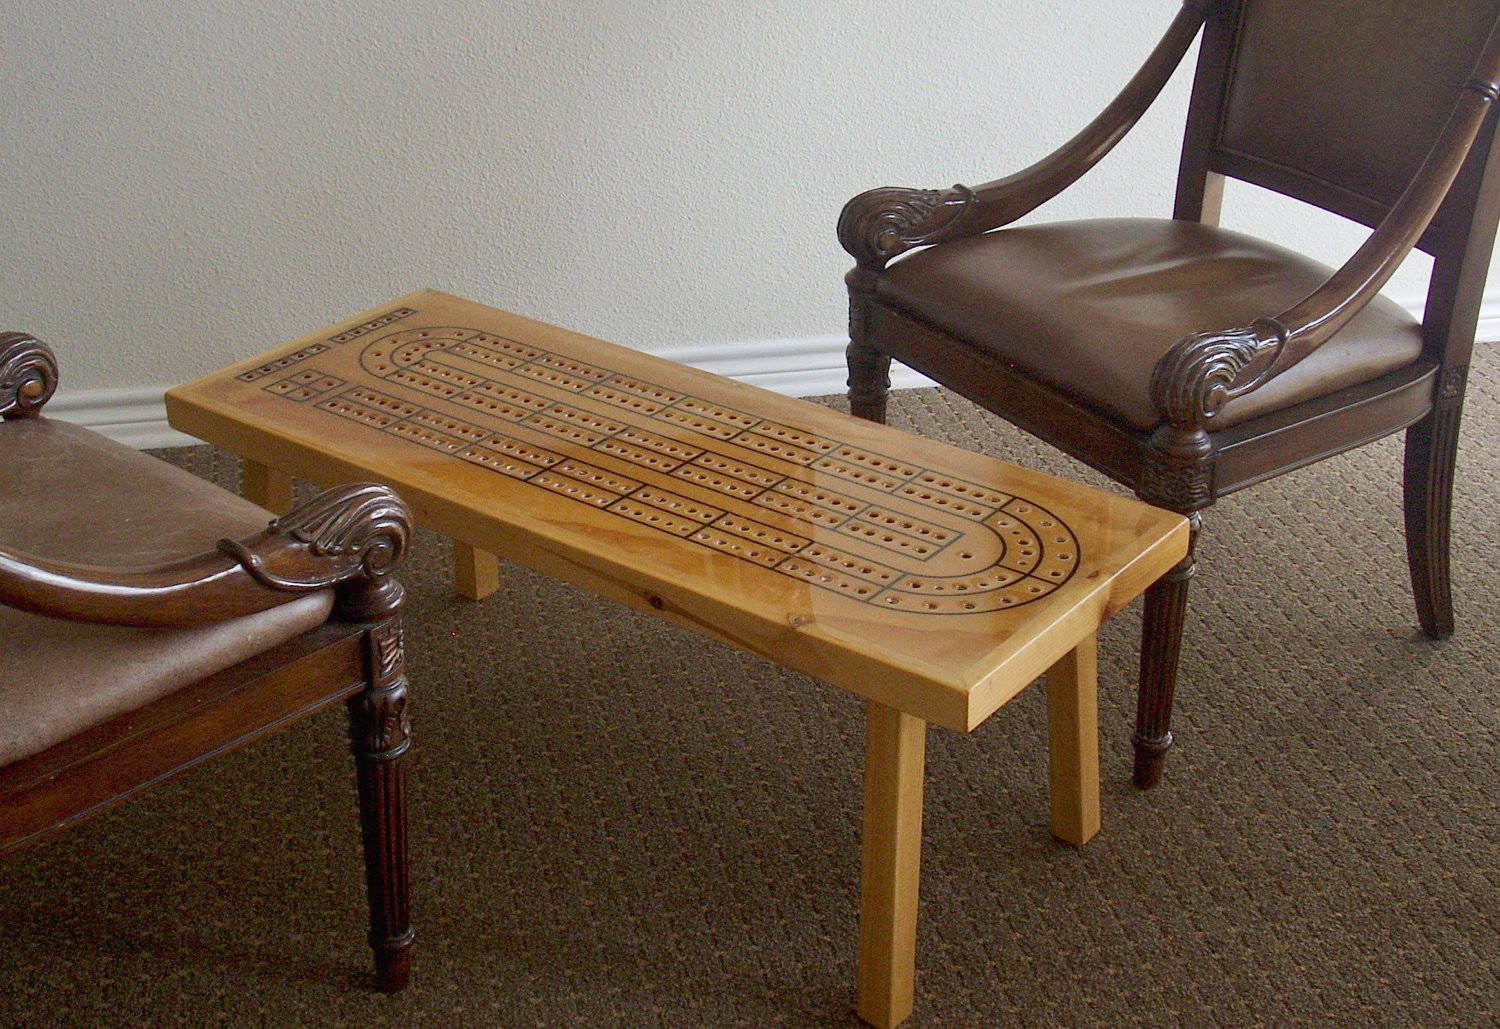 Cribbage Wooden Table Chairs Wallpaper